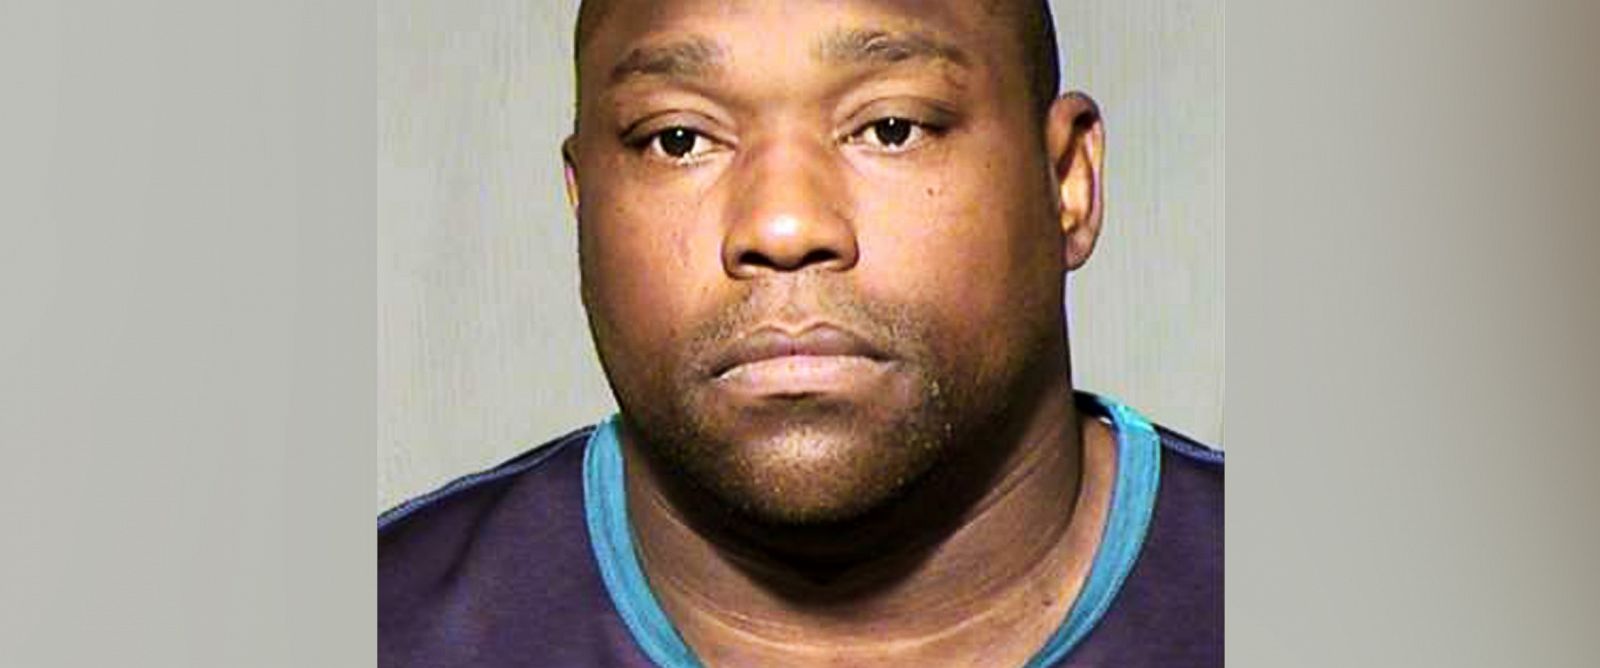 Nfl Legend Warren Sapp Arrested For Allegedly Soliciting Prostitution And Assault Abc News 5853